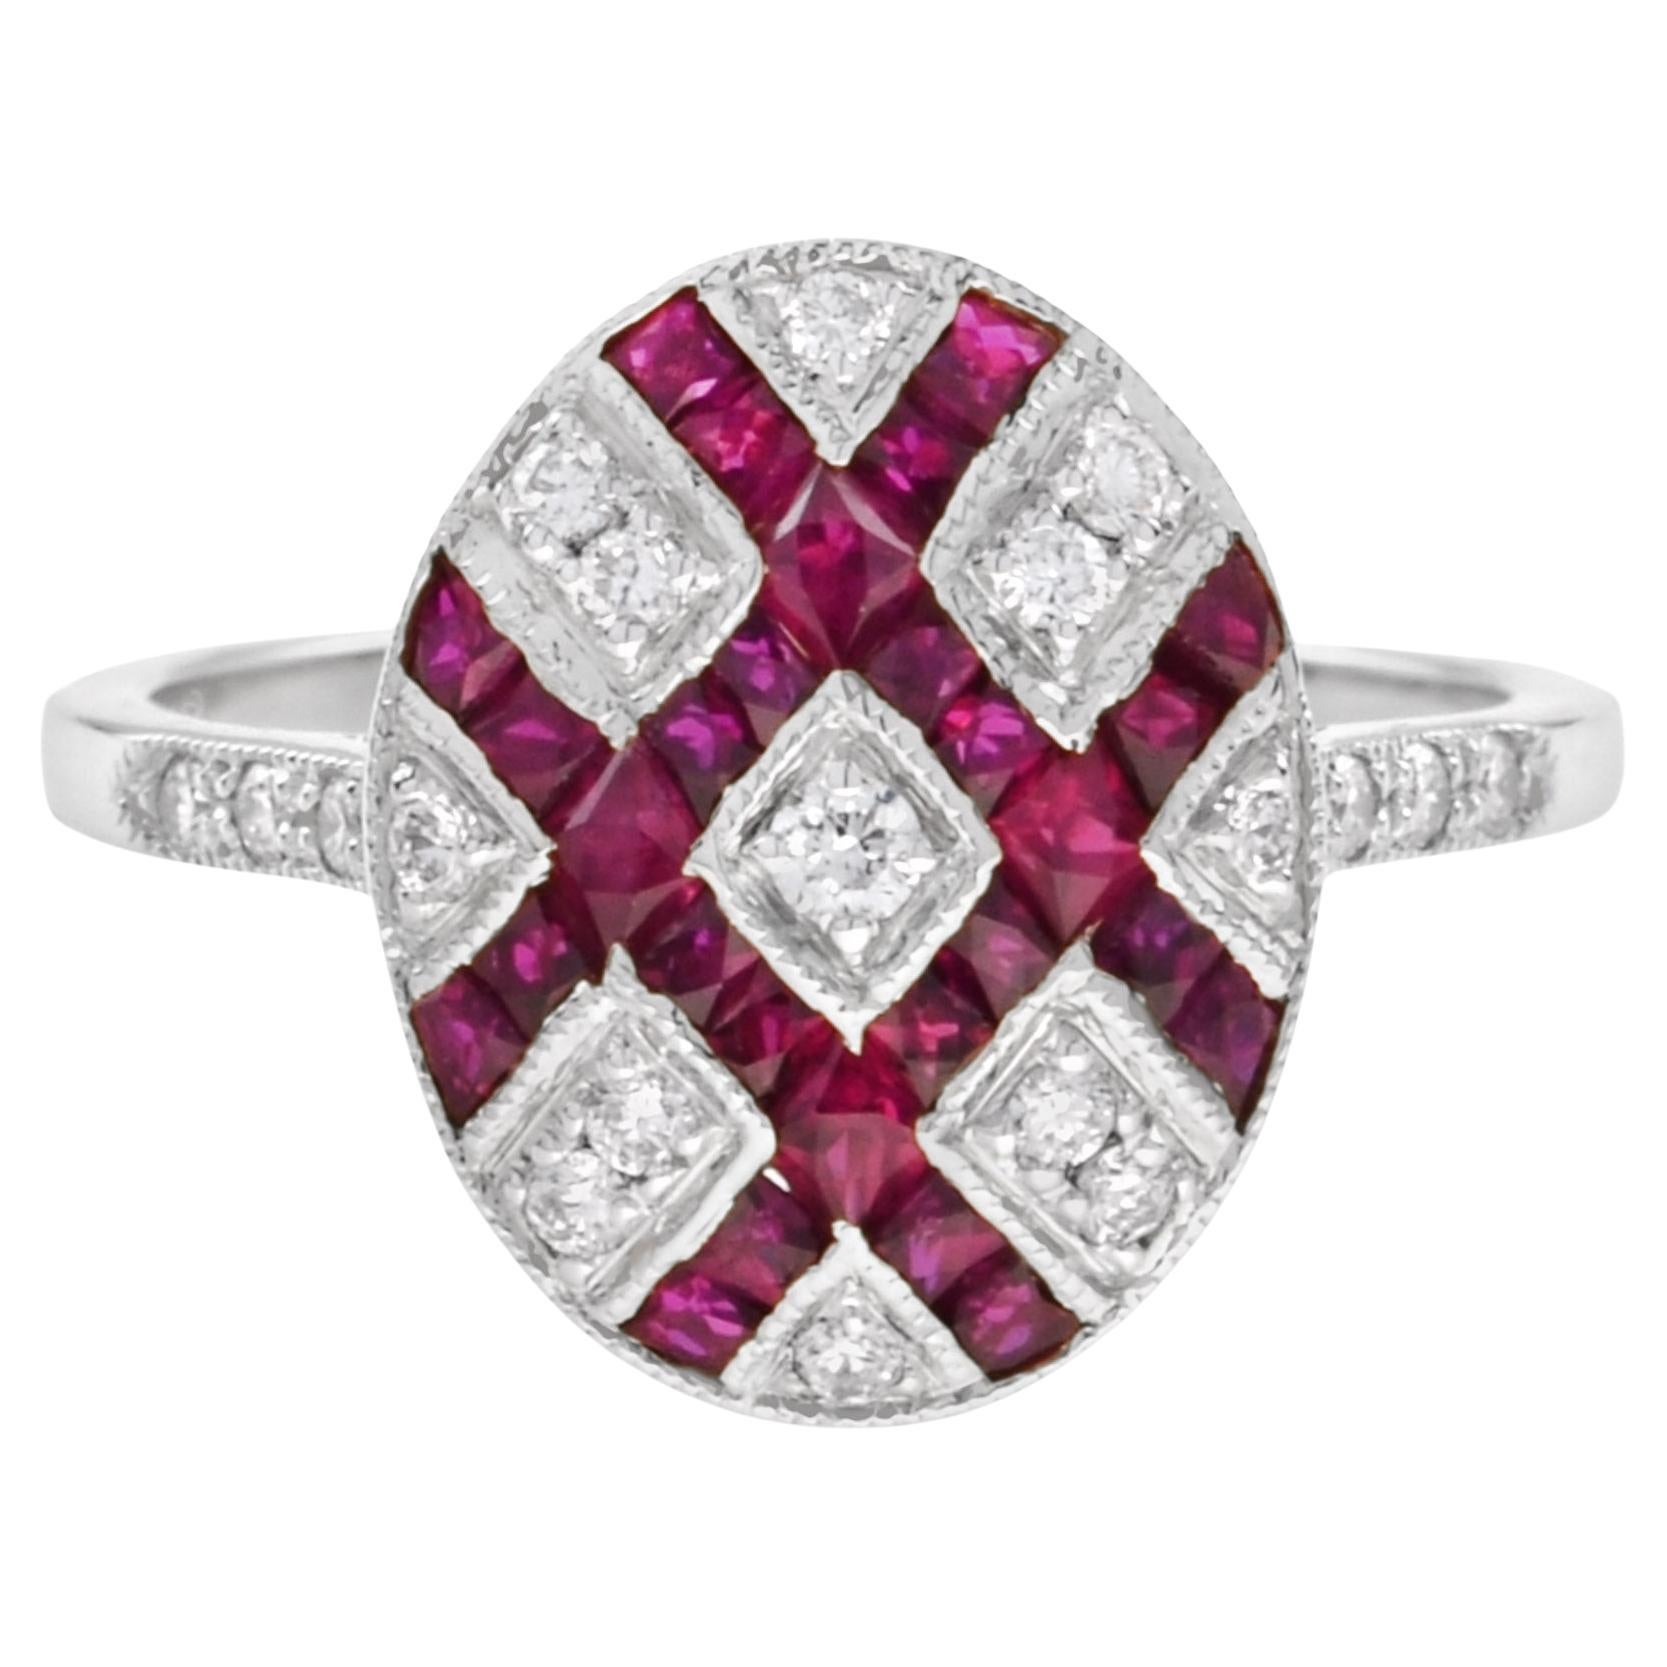 For Sale:  Art Deco Style Square Ruby and Diamond Ellipse Cocktail Ring in 18K White Gold